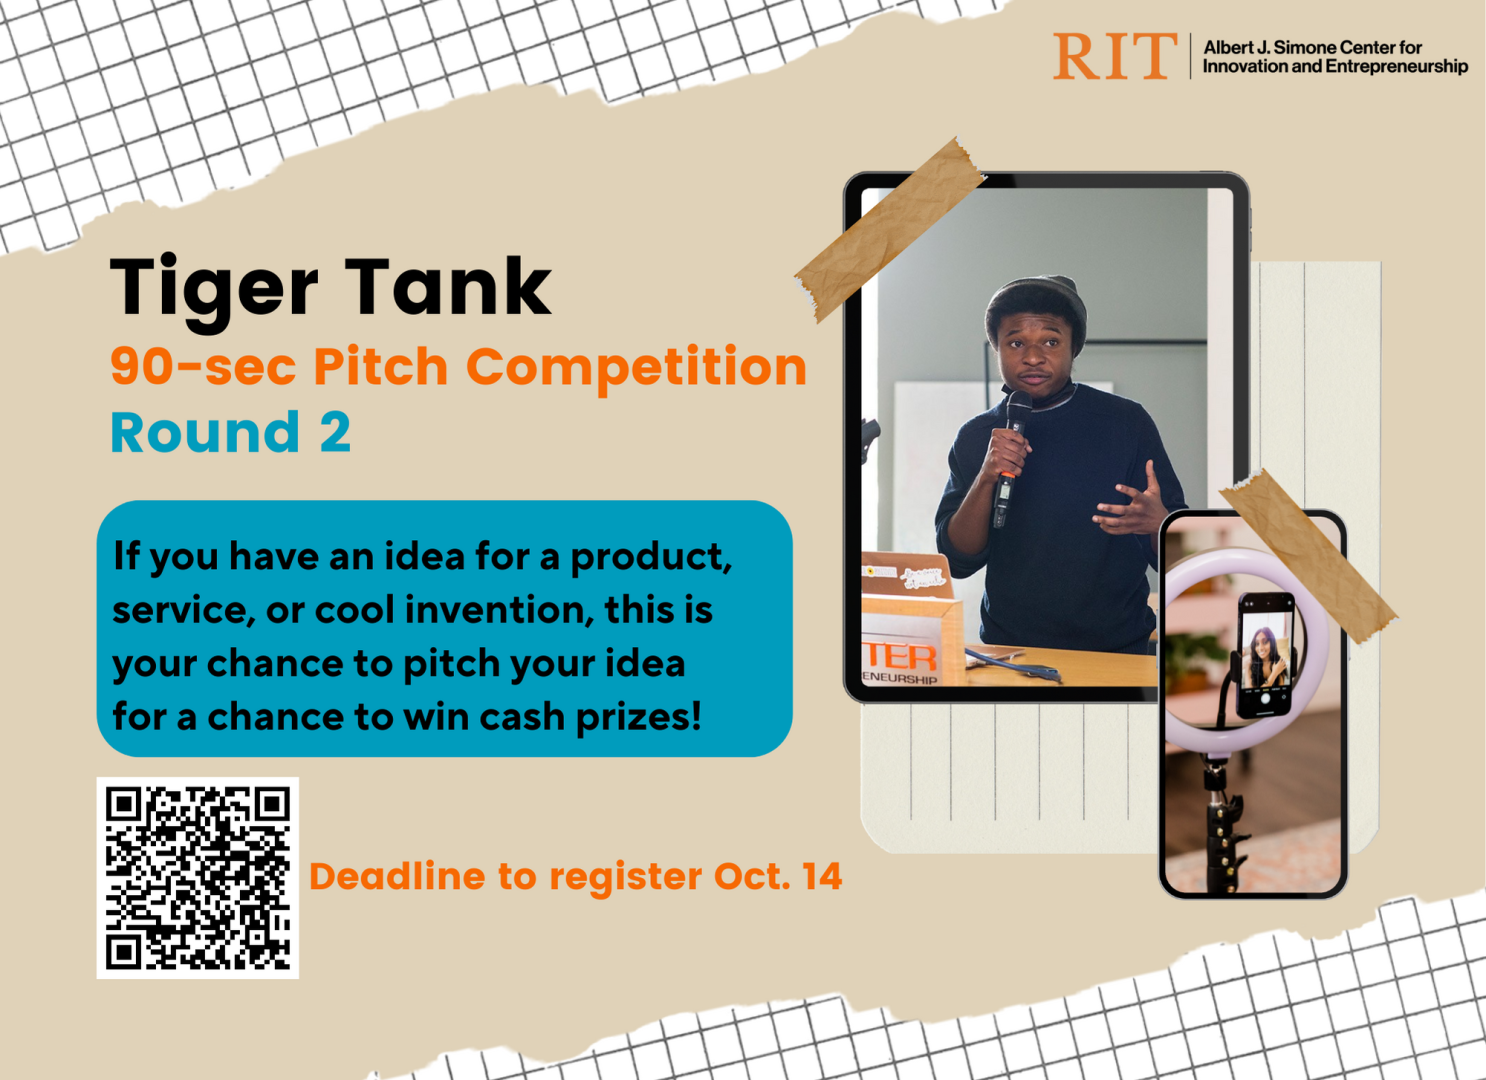 Tiger Tank Pitch Competition: Round 2